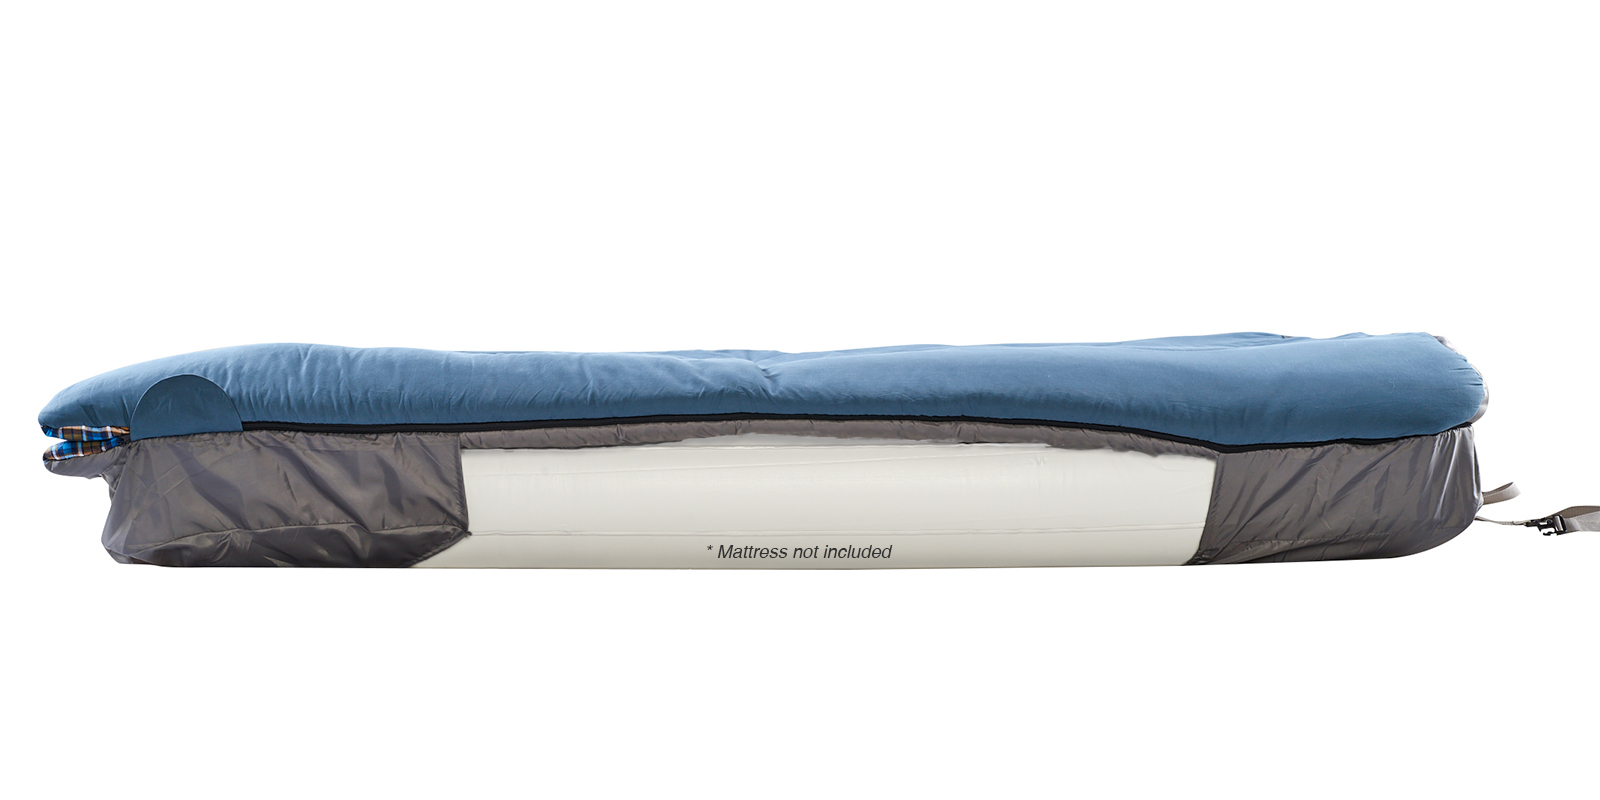 Oztrail Outback Comforter Queen Sleeping Bag